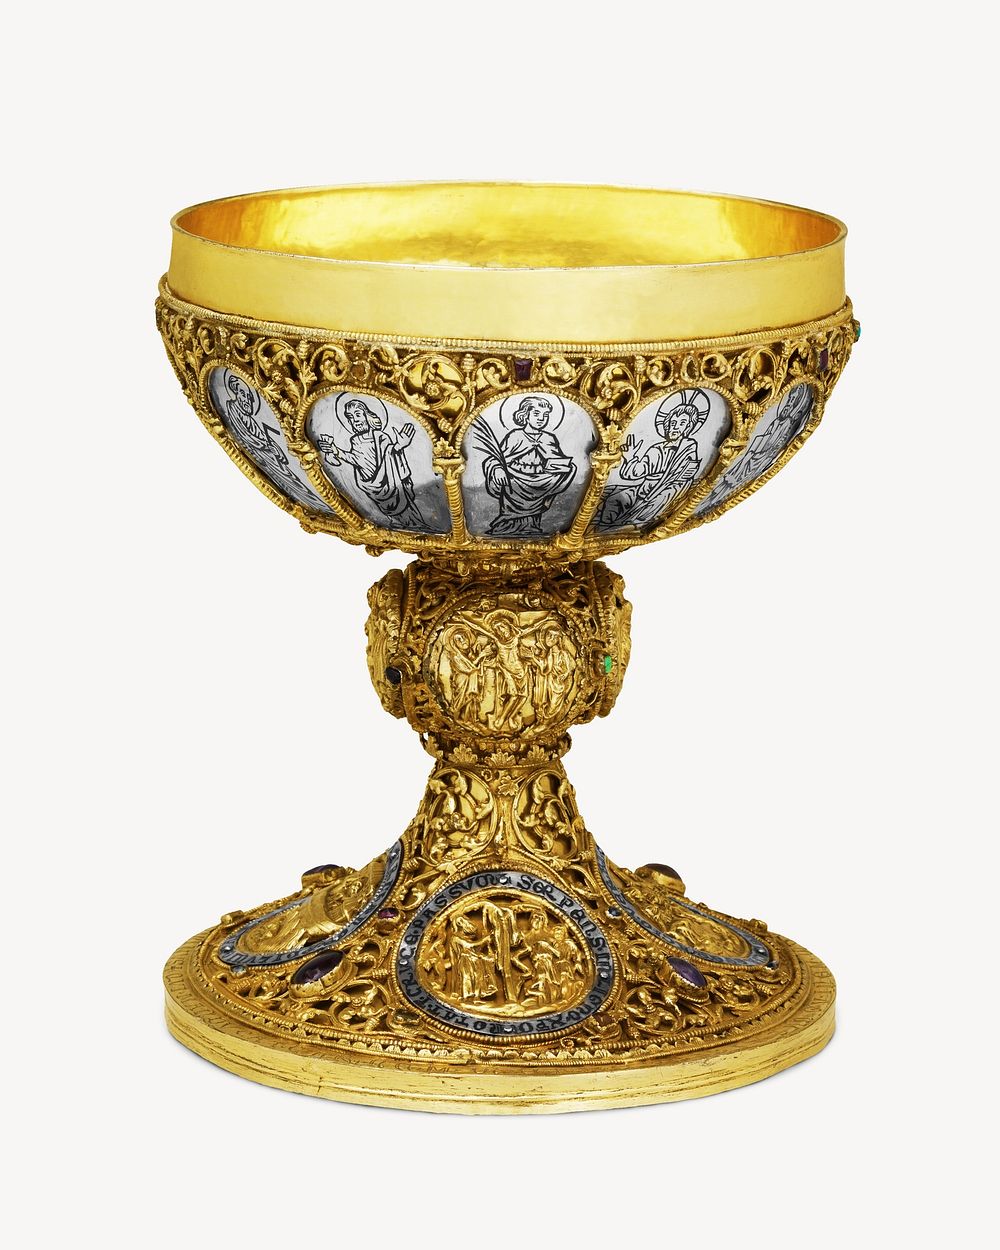 Gold chalice.    Remastered by rawpixel